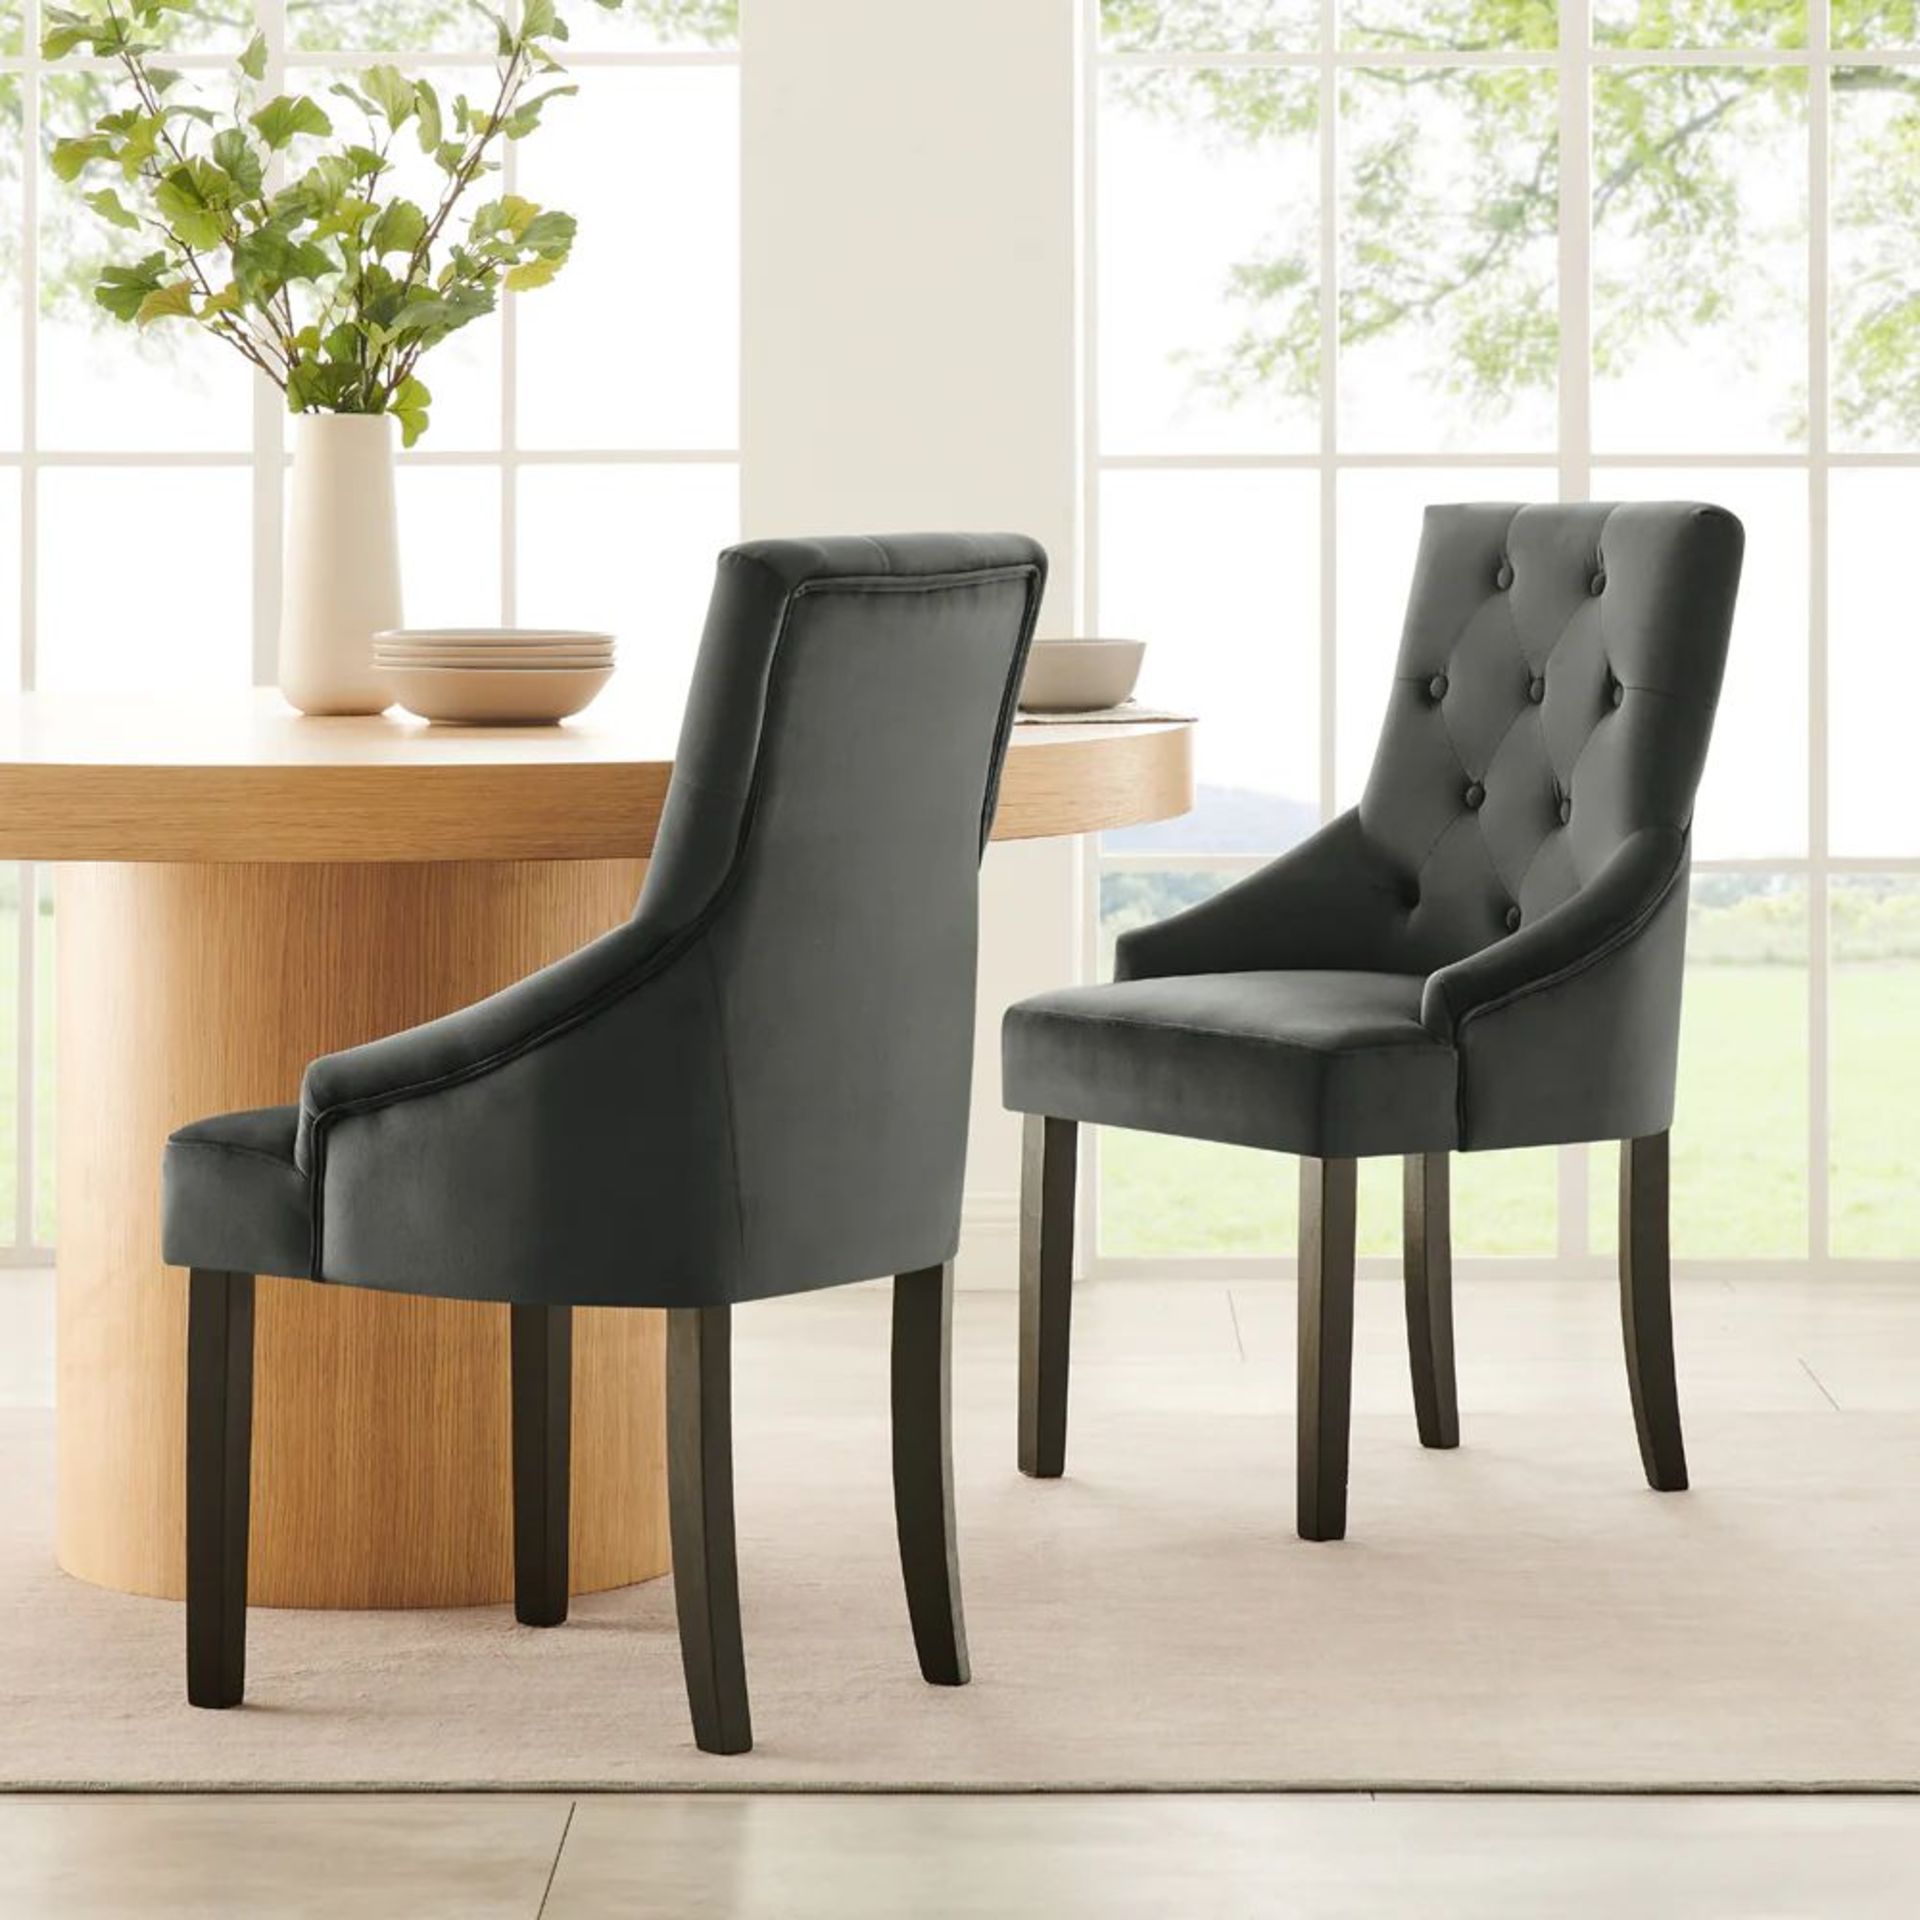 Harbury Set of 2 Buttoned Dining Chairs (Dark Grey Velvet with Black Legs). - BI. RRP £309.99. Our